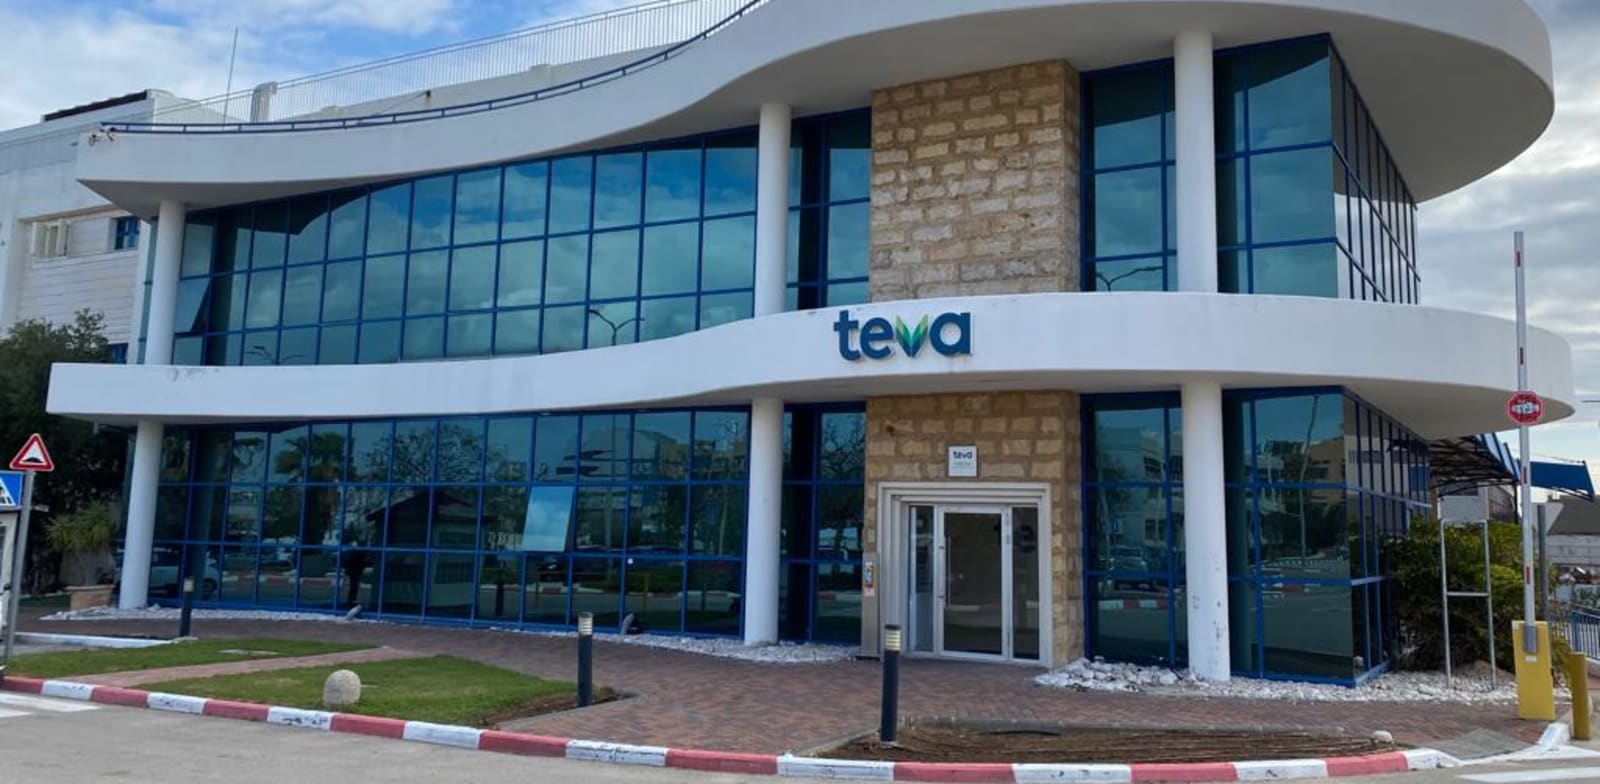 Just 10% of Teva's employees located -